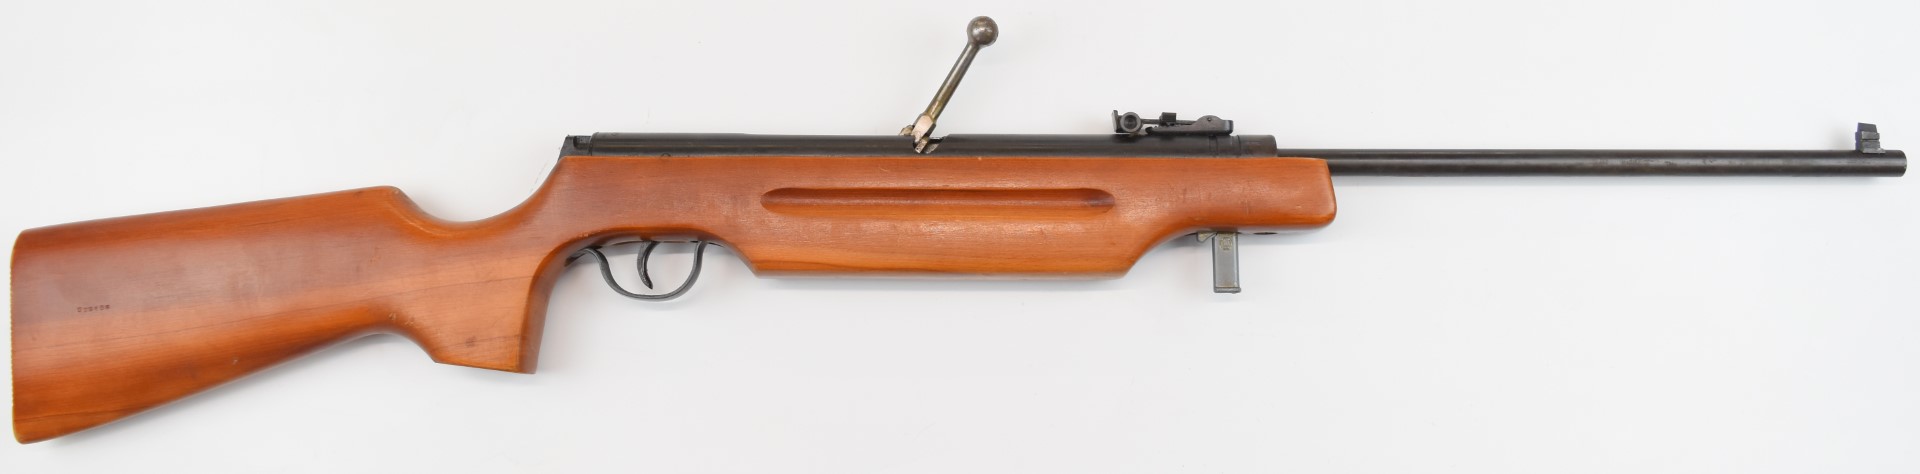 Haenel Model 310 lever-action 4.4mm calibre air rifle with semi-pistol grip, adjustable sights and - Image 2 of 19